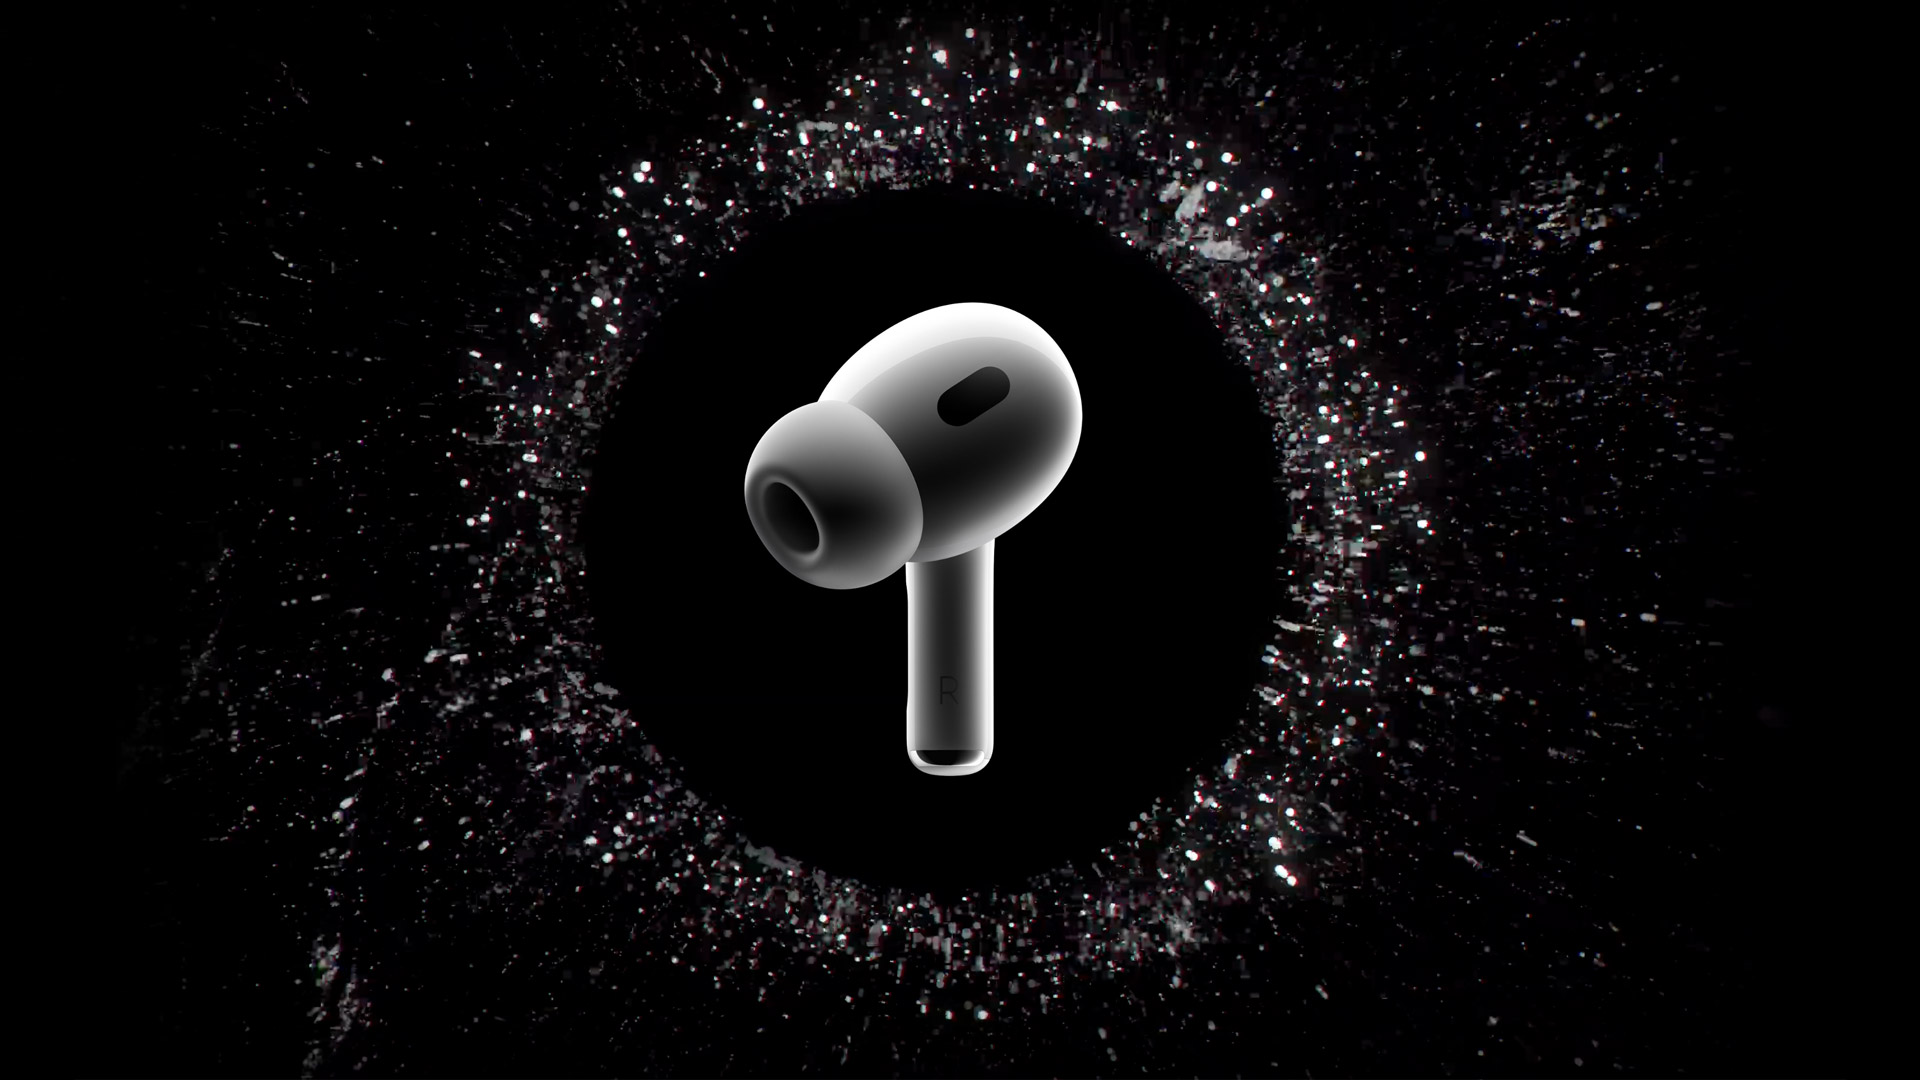 None of the AirPods Support Lossless Playback, Not Even AirPods Max